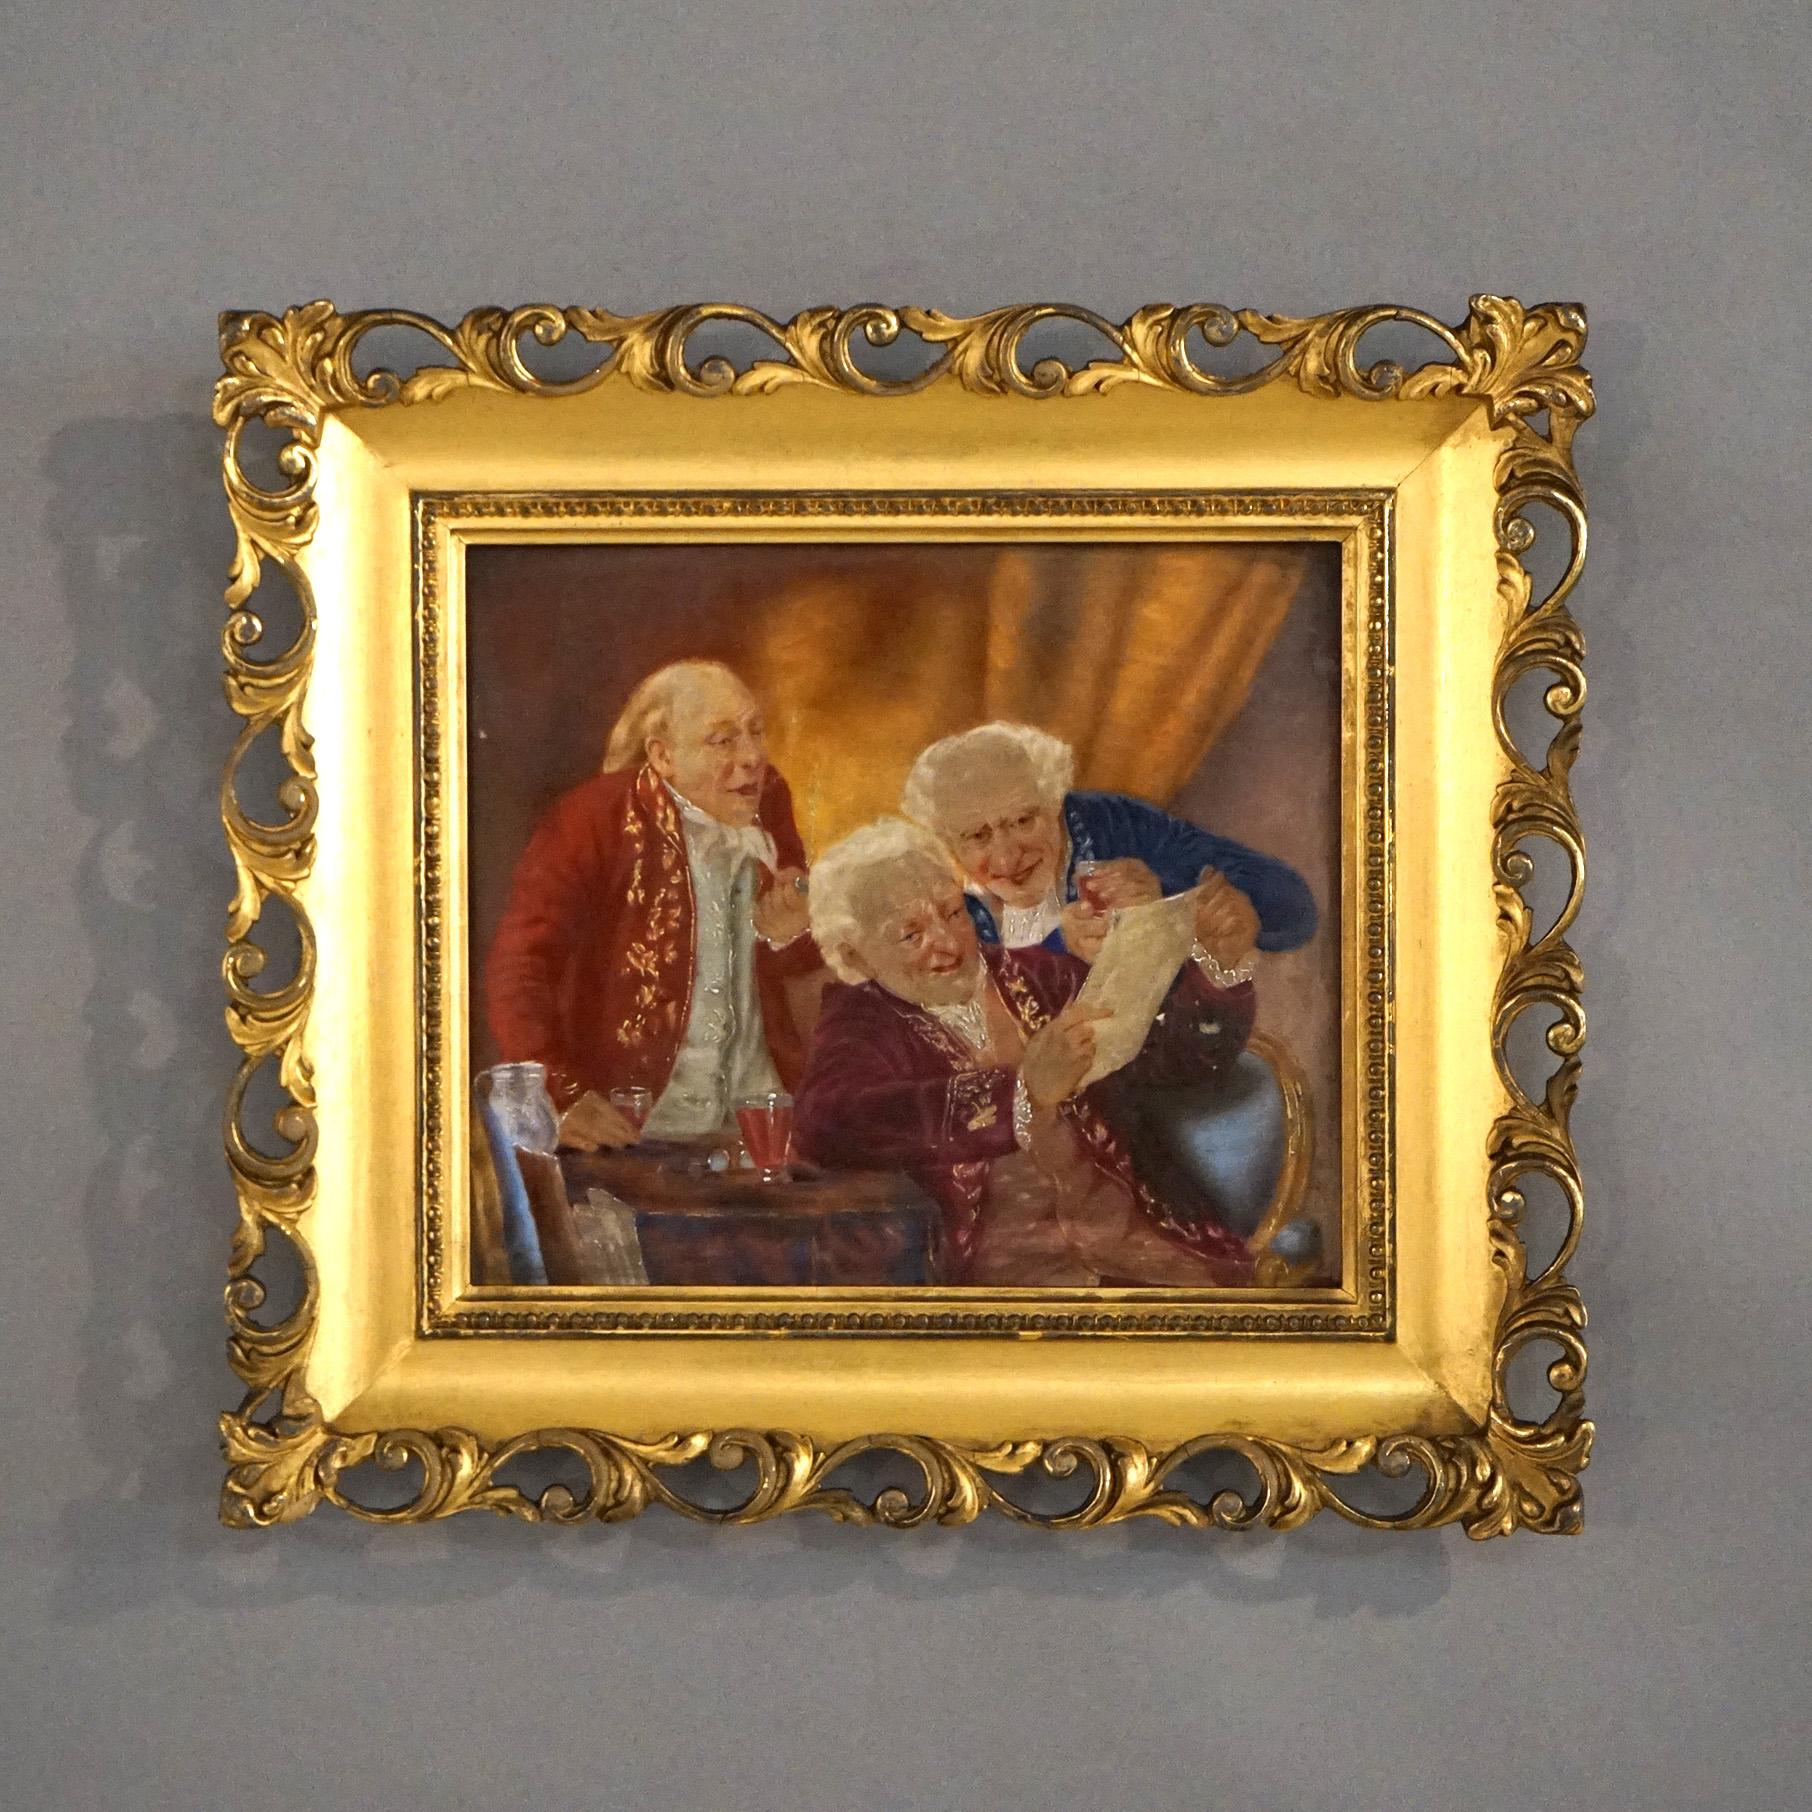 An antique genre painting on porcelain in the manner of KPM offers interior scene with figures, seated in reticulated foliate form giltwood frame, 19th century

Measures - 11